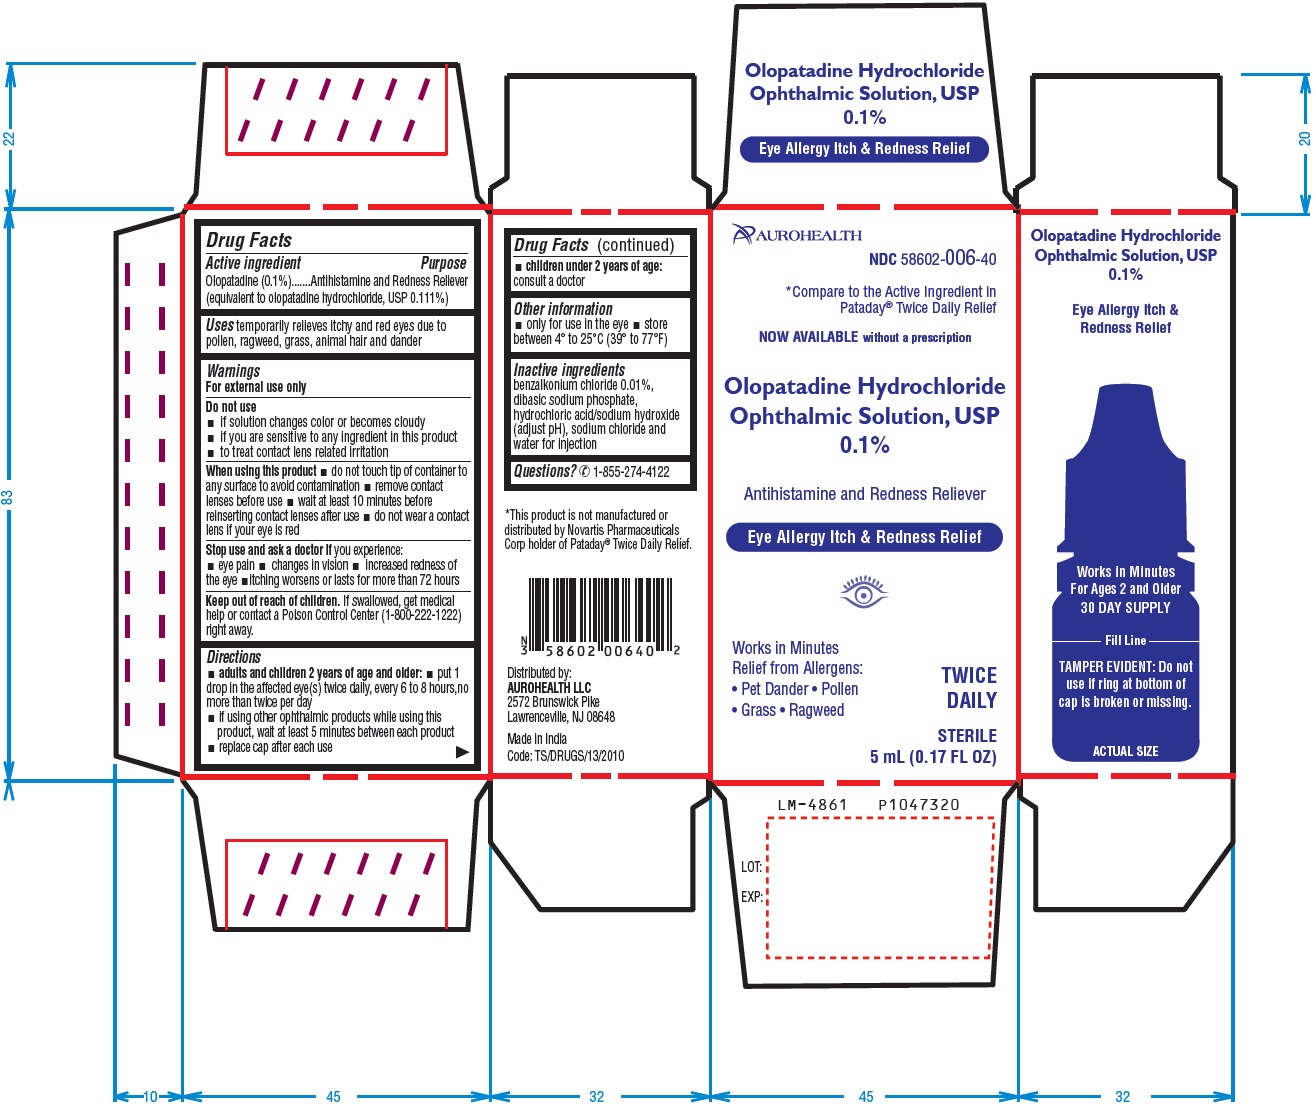 PACKAGE LABEL-PRINCIPAL DISPLAY PANEL-0.1% (5 mL Container Carton)